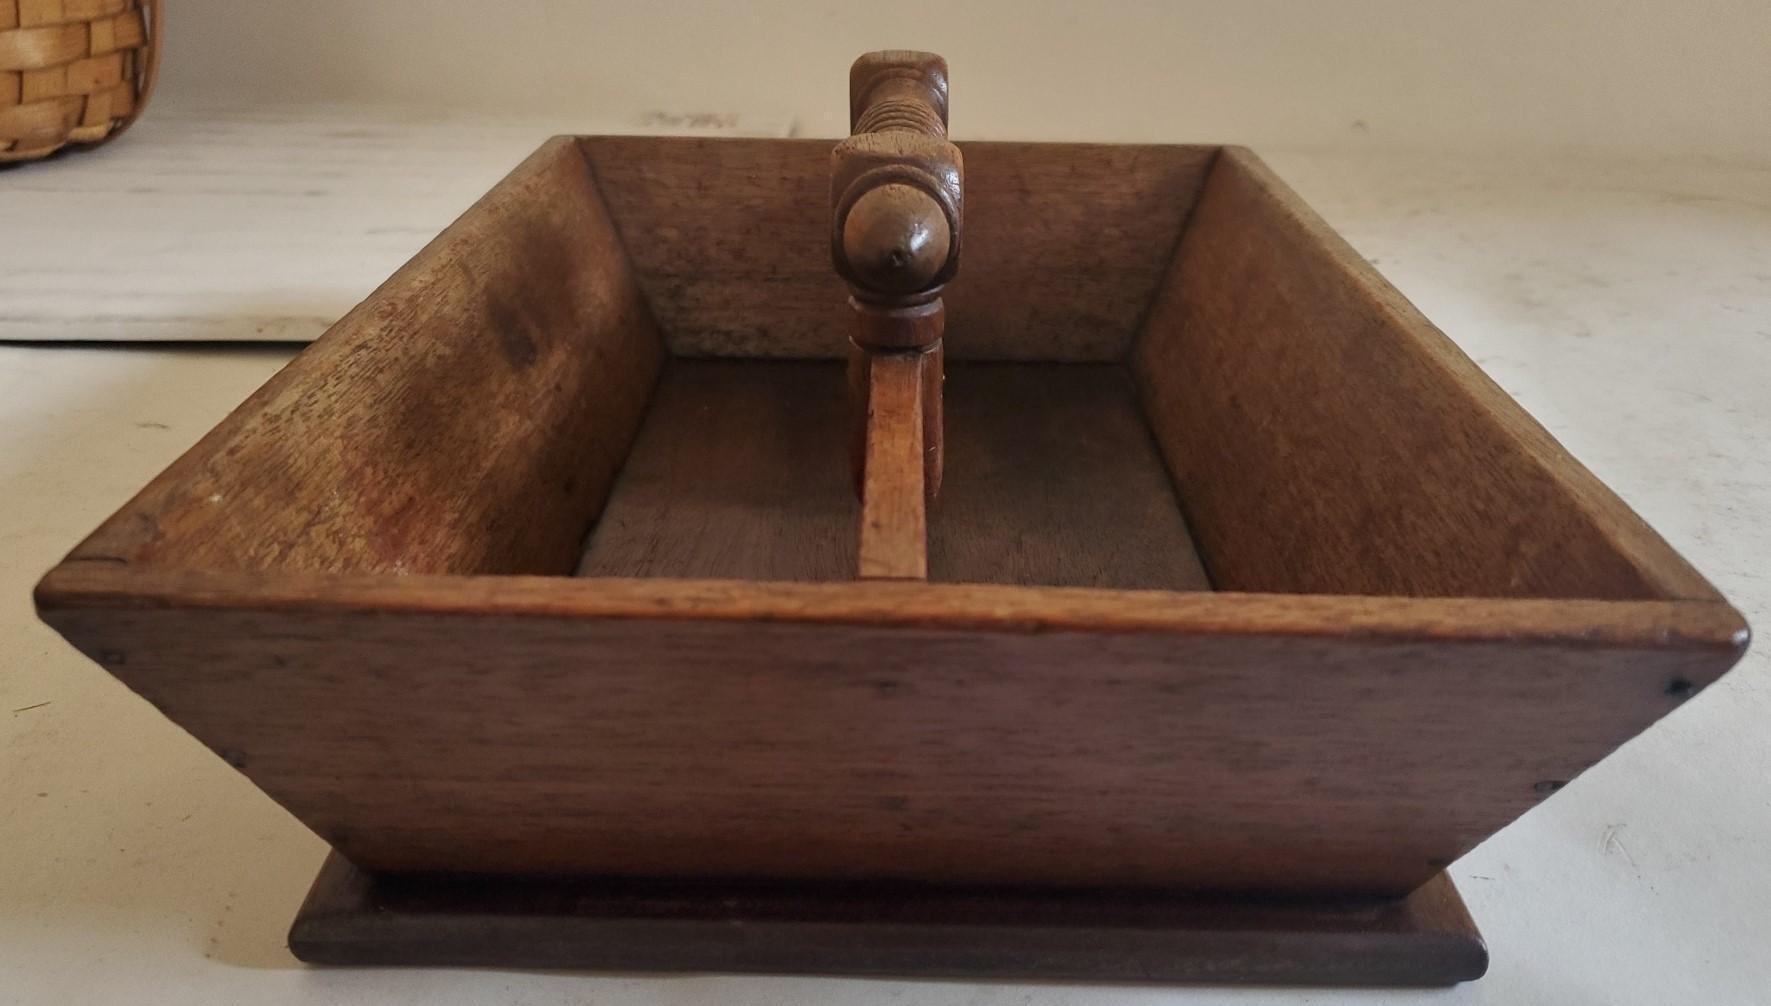 This finely handmade 19th century walnut cutlery box is in fine condition and retains a nice mellow patina. Great for so many different uses. Super cool for outgoing mail or bills! Notice the fine detail hand carved handle.